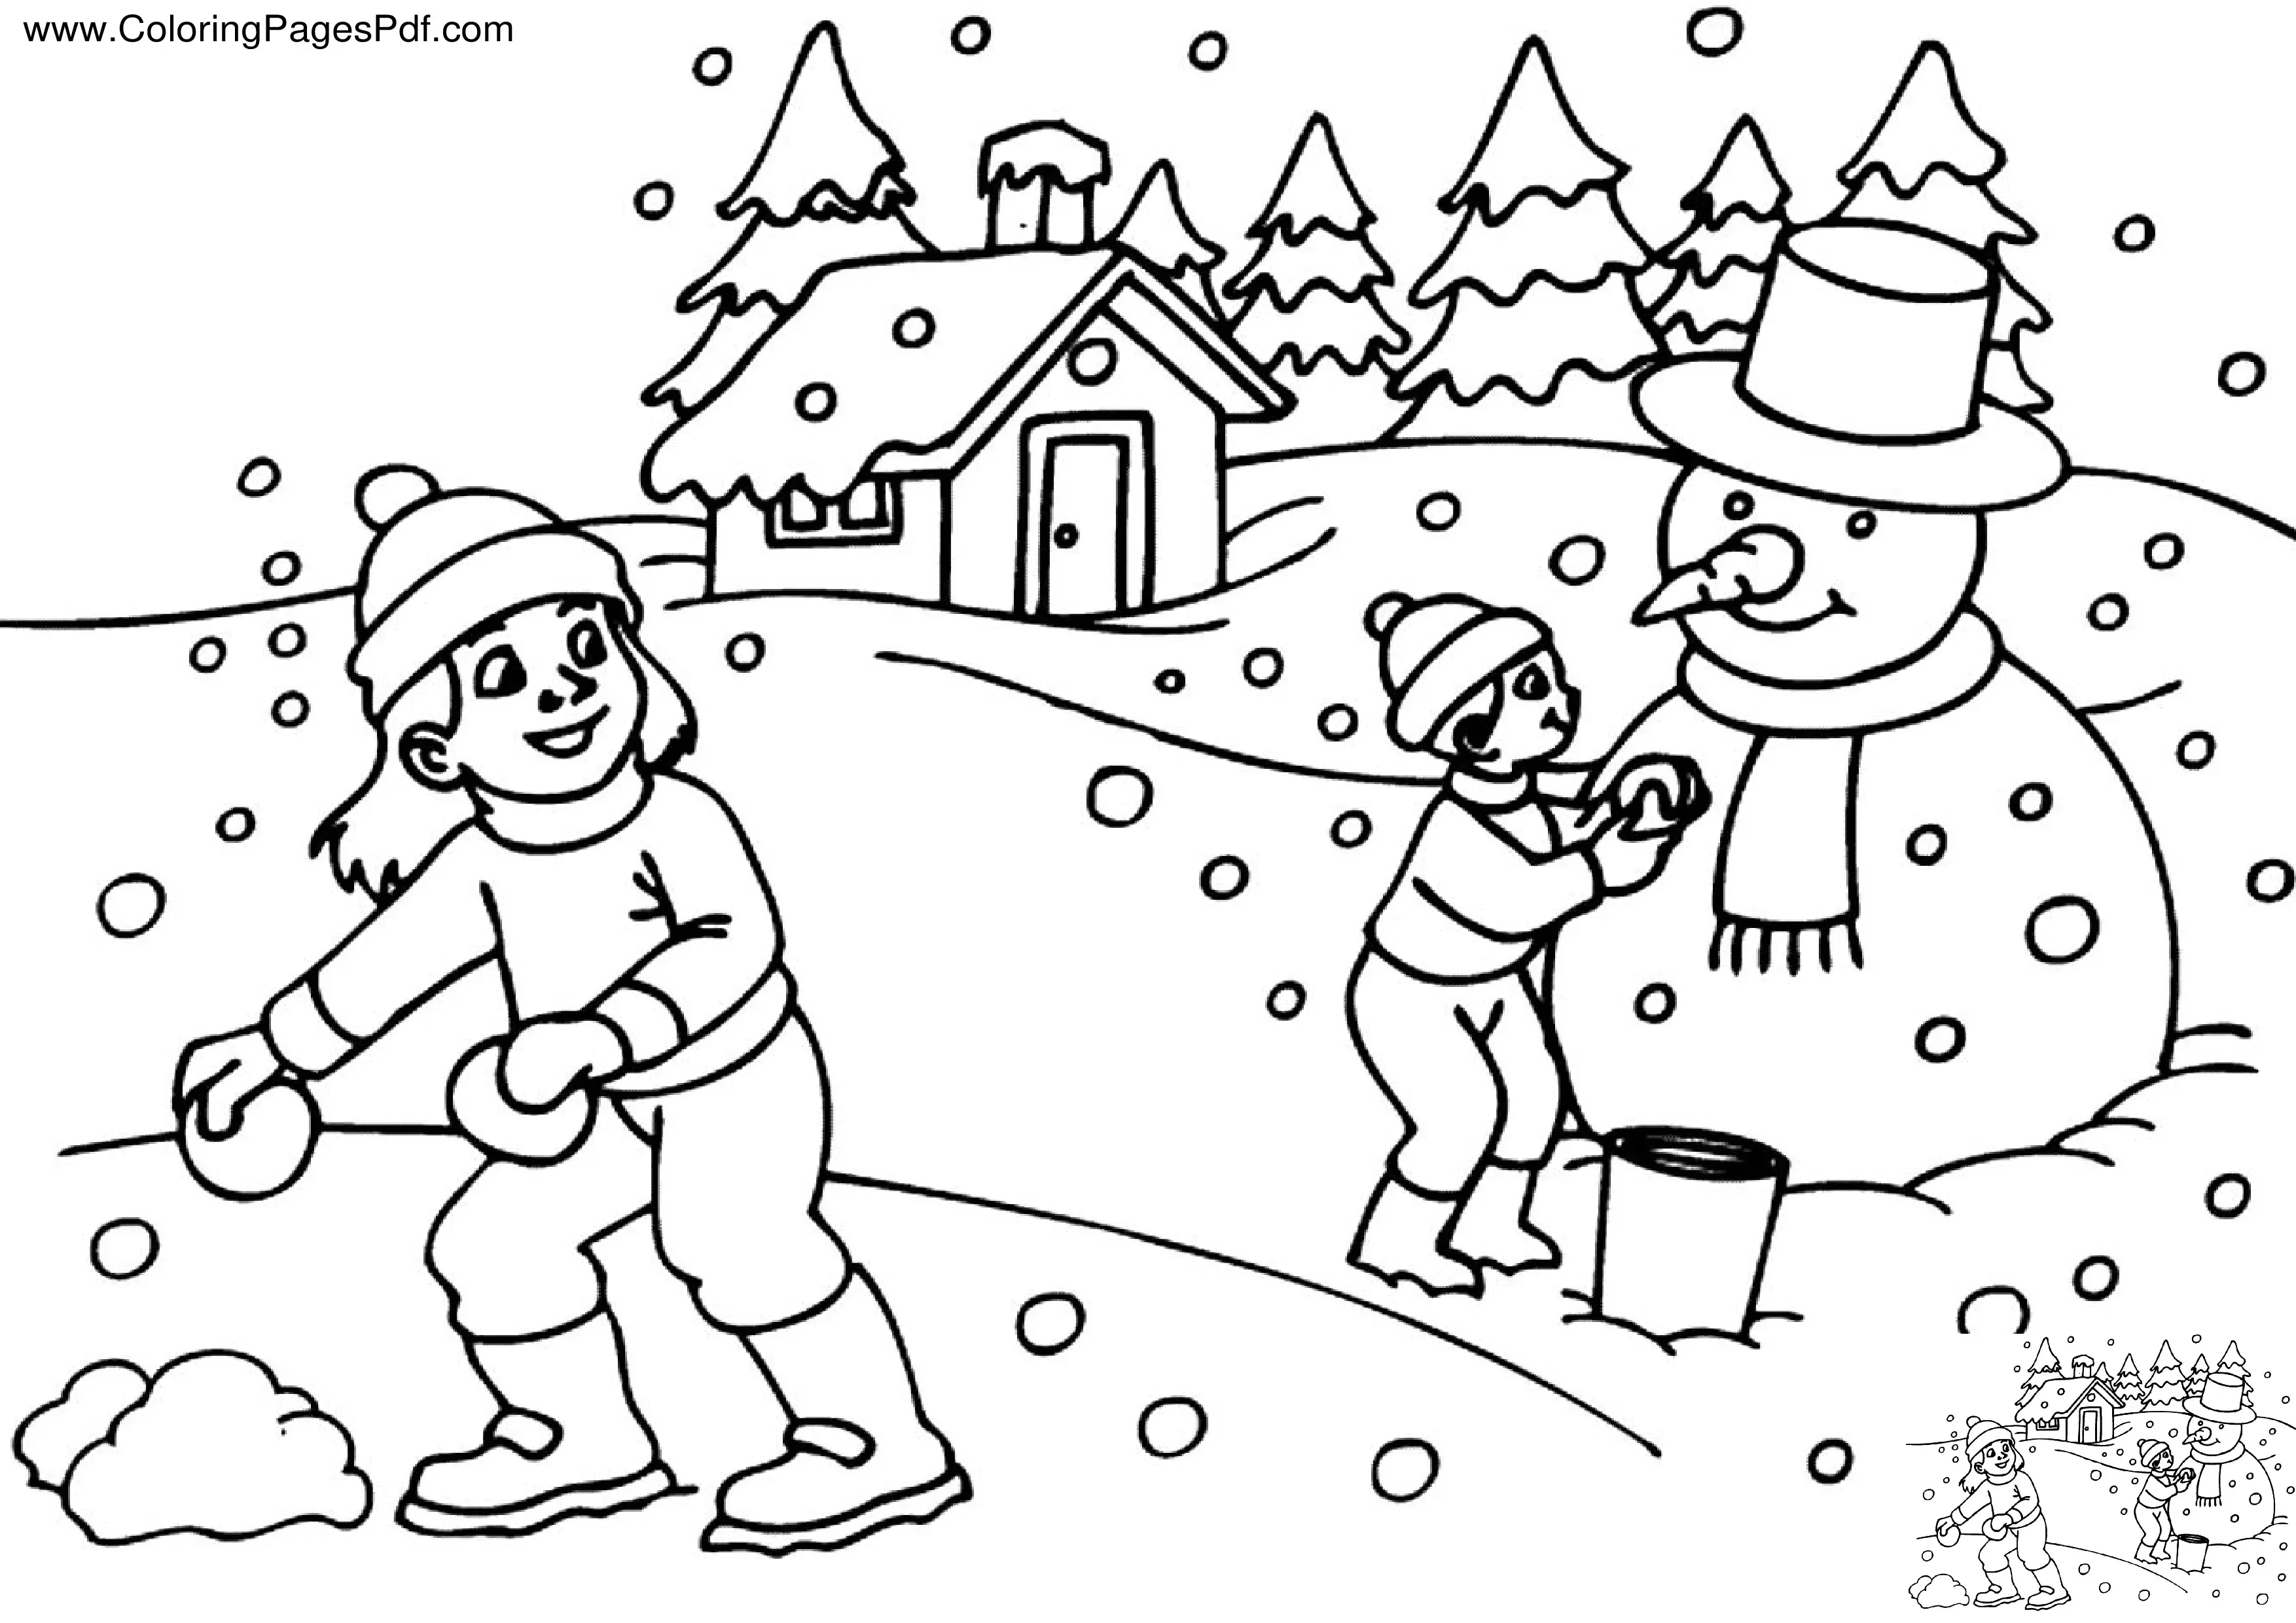 Free snowman coloring pages